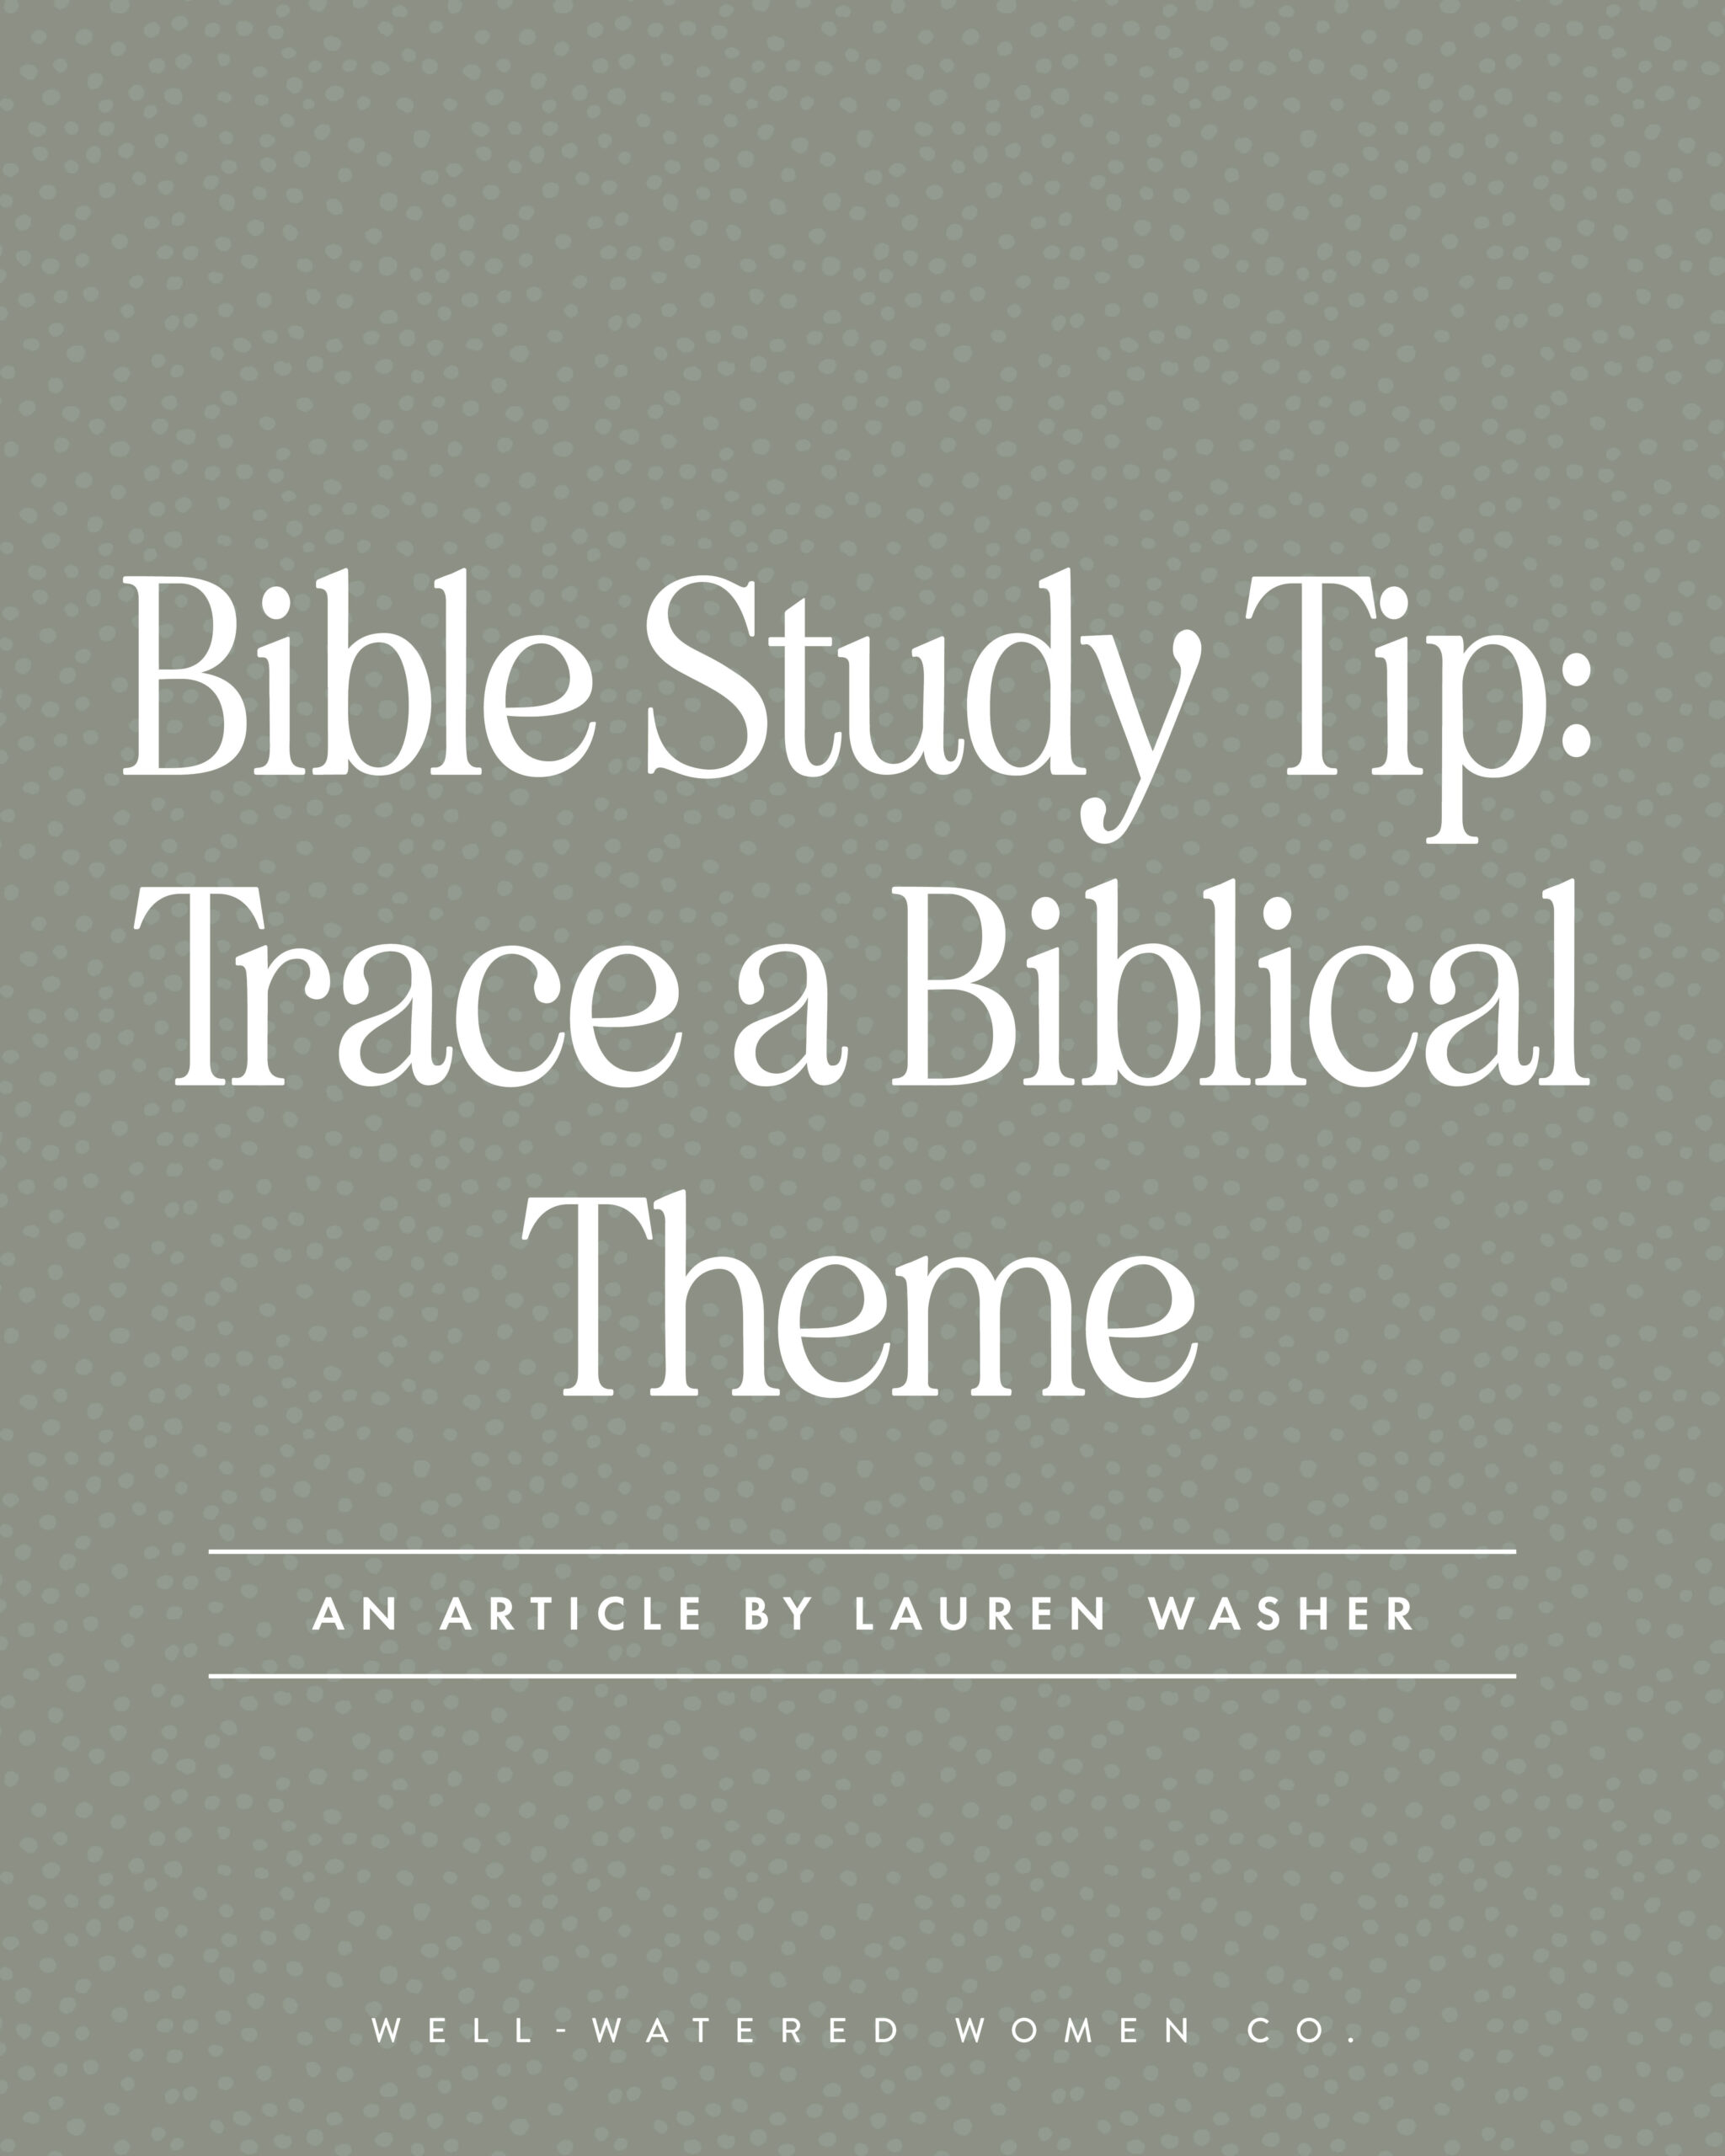 Bible Study Tip Trace a Biblical Theme - an article from Well-Watered Women